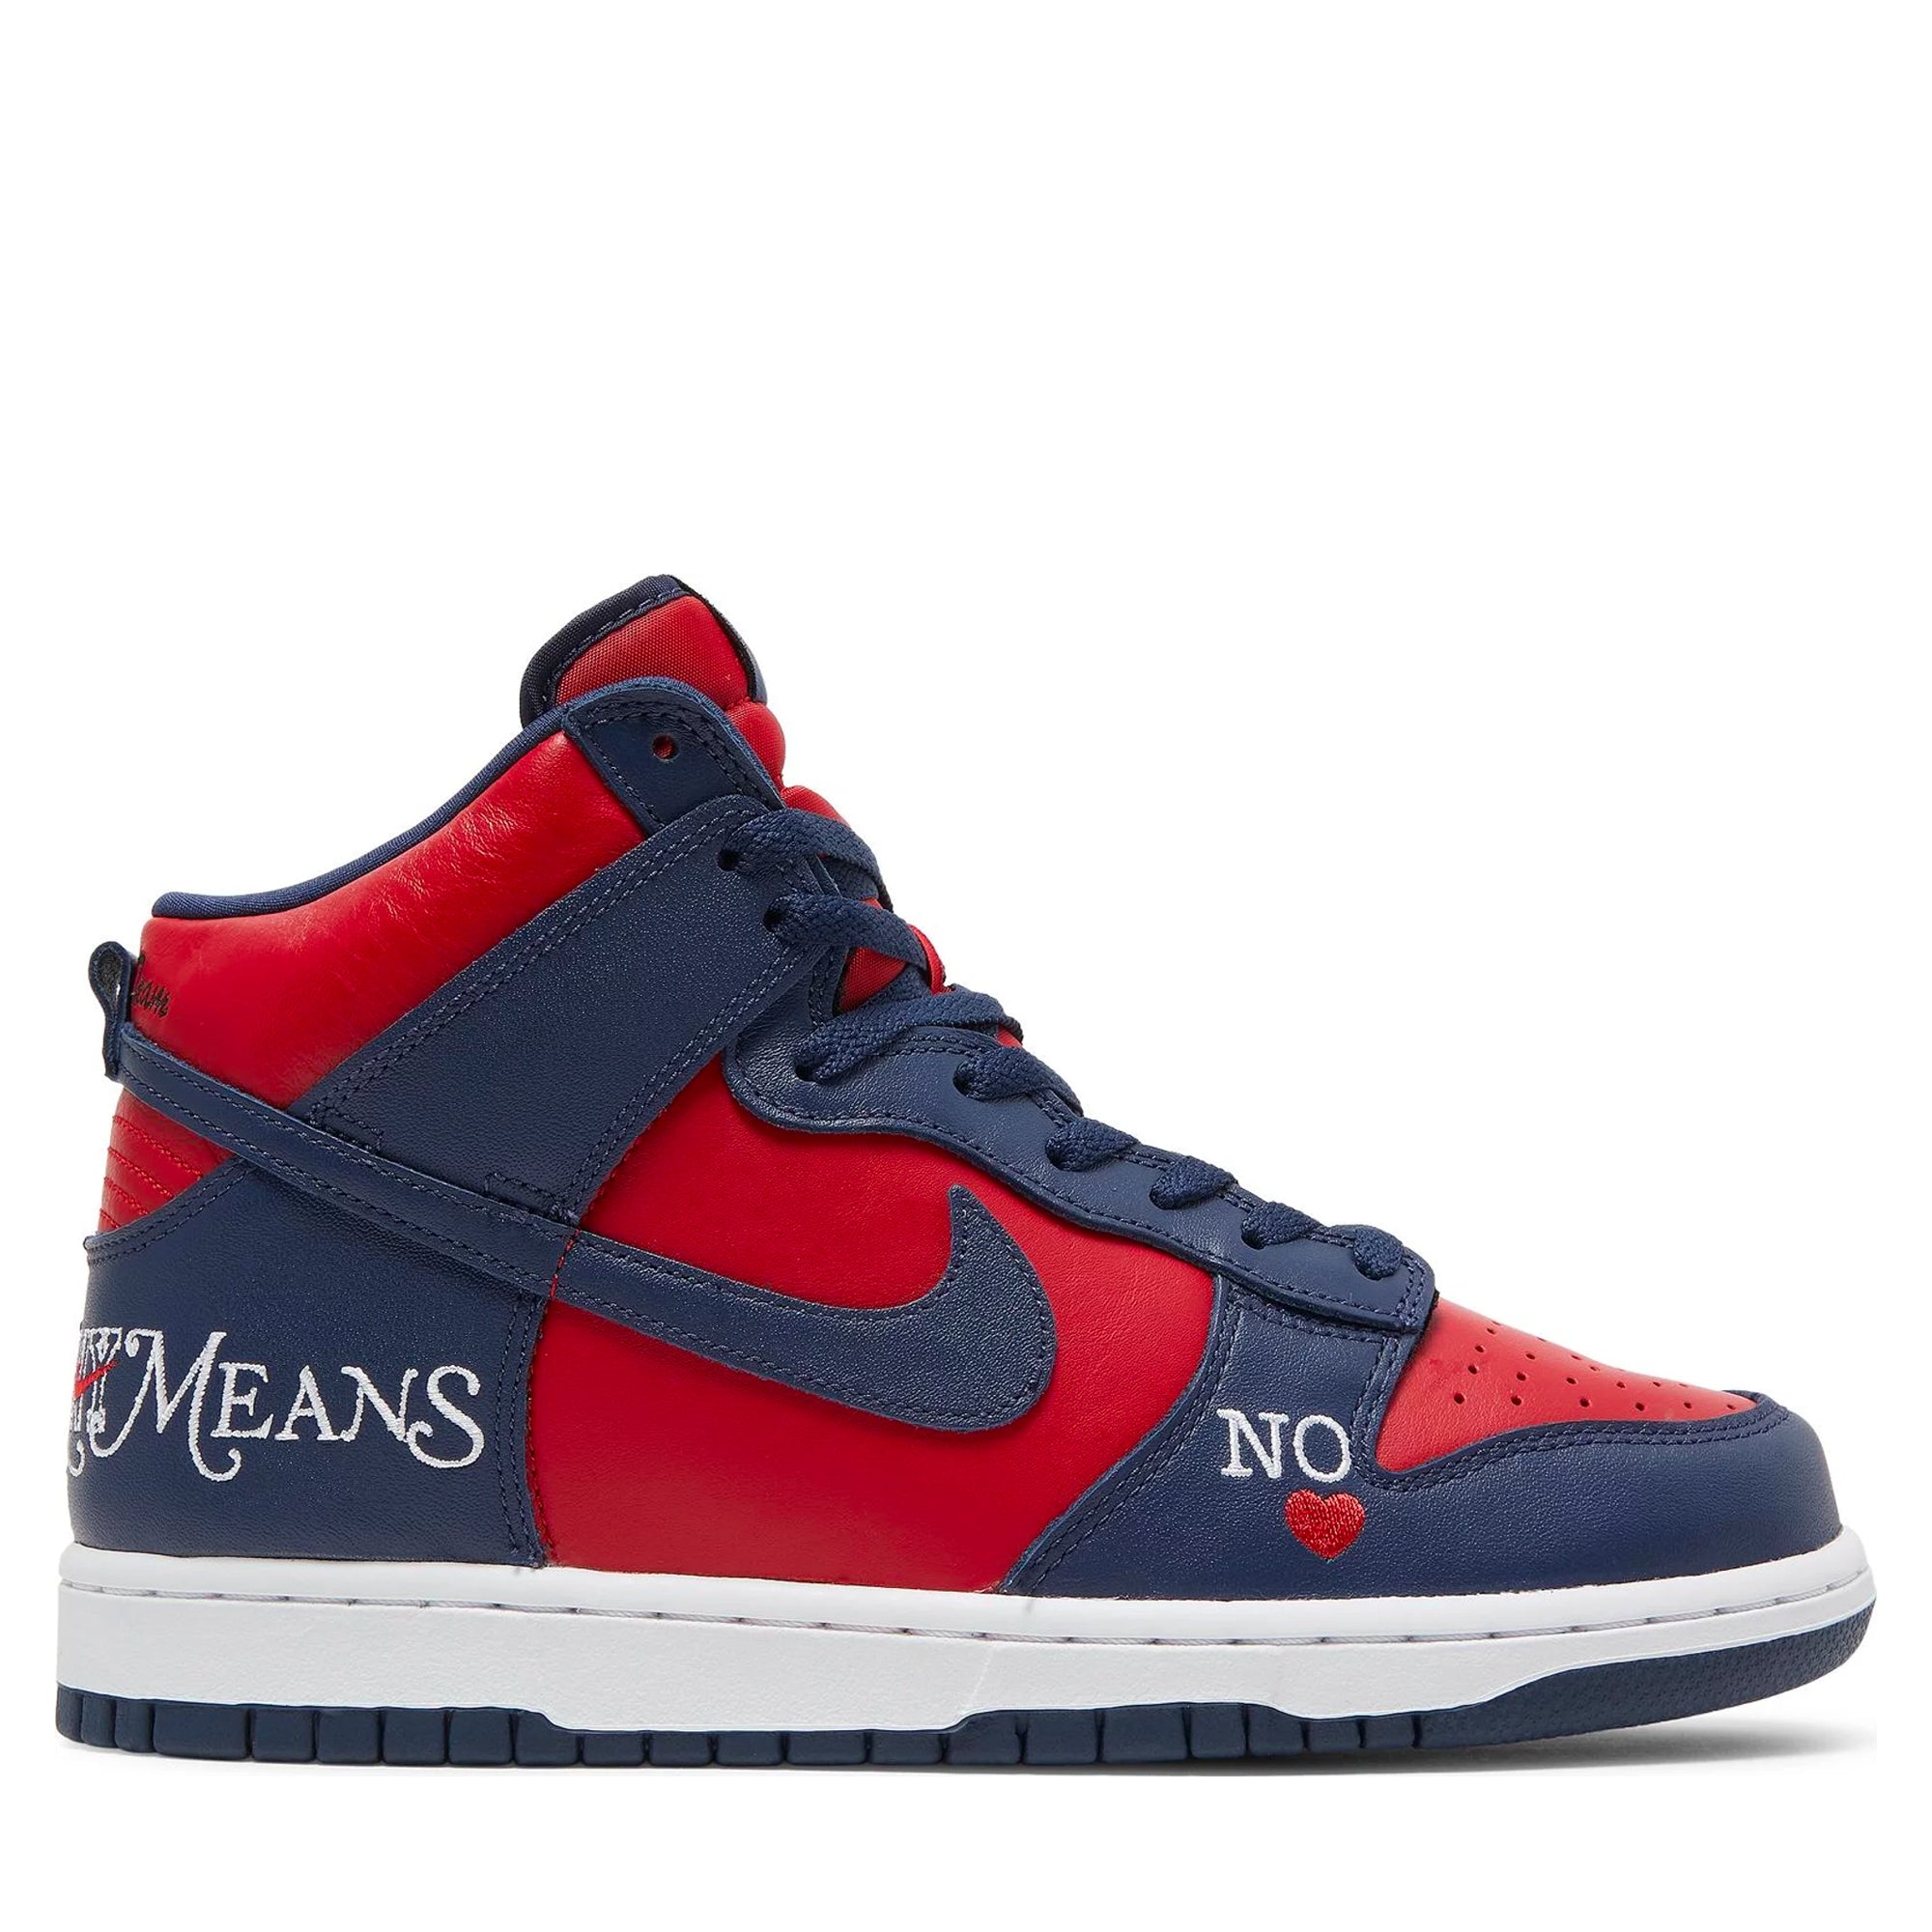 Nike SB Dunk High Supreme By Any Means Navy-PLUS